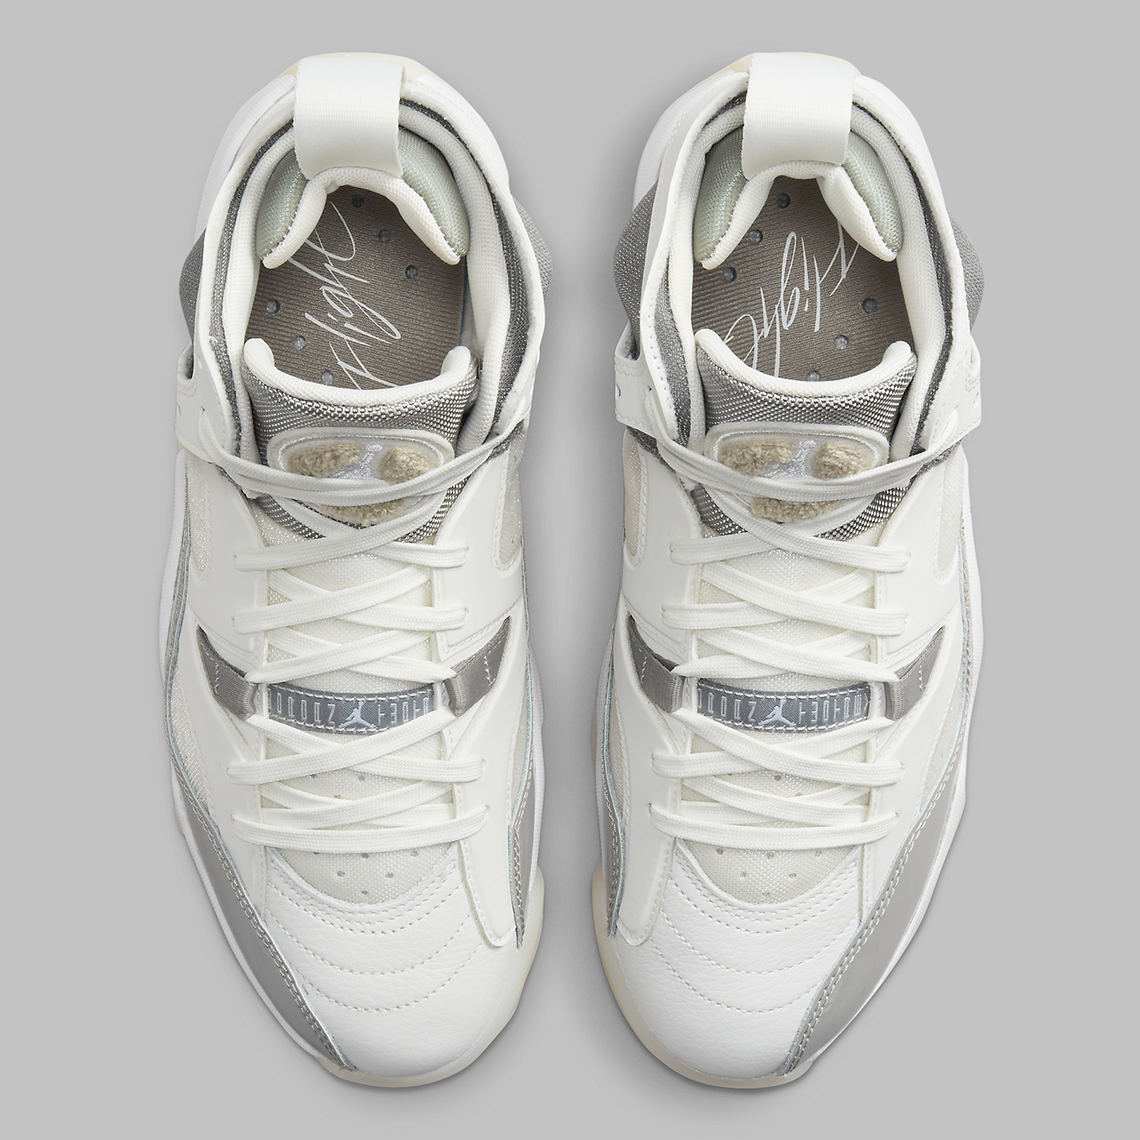 the best jordan release of december might be the jumpman team ii retro Womens White Grey Dr9631 002 3